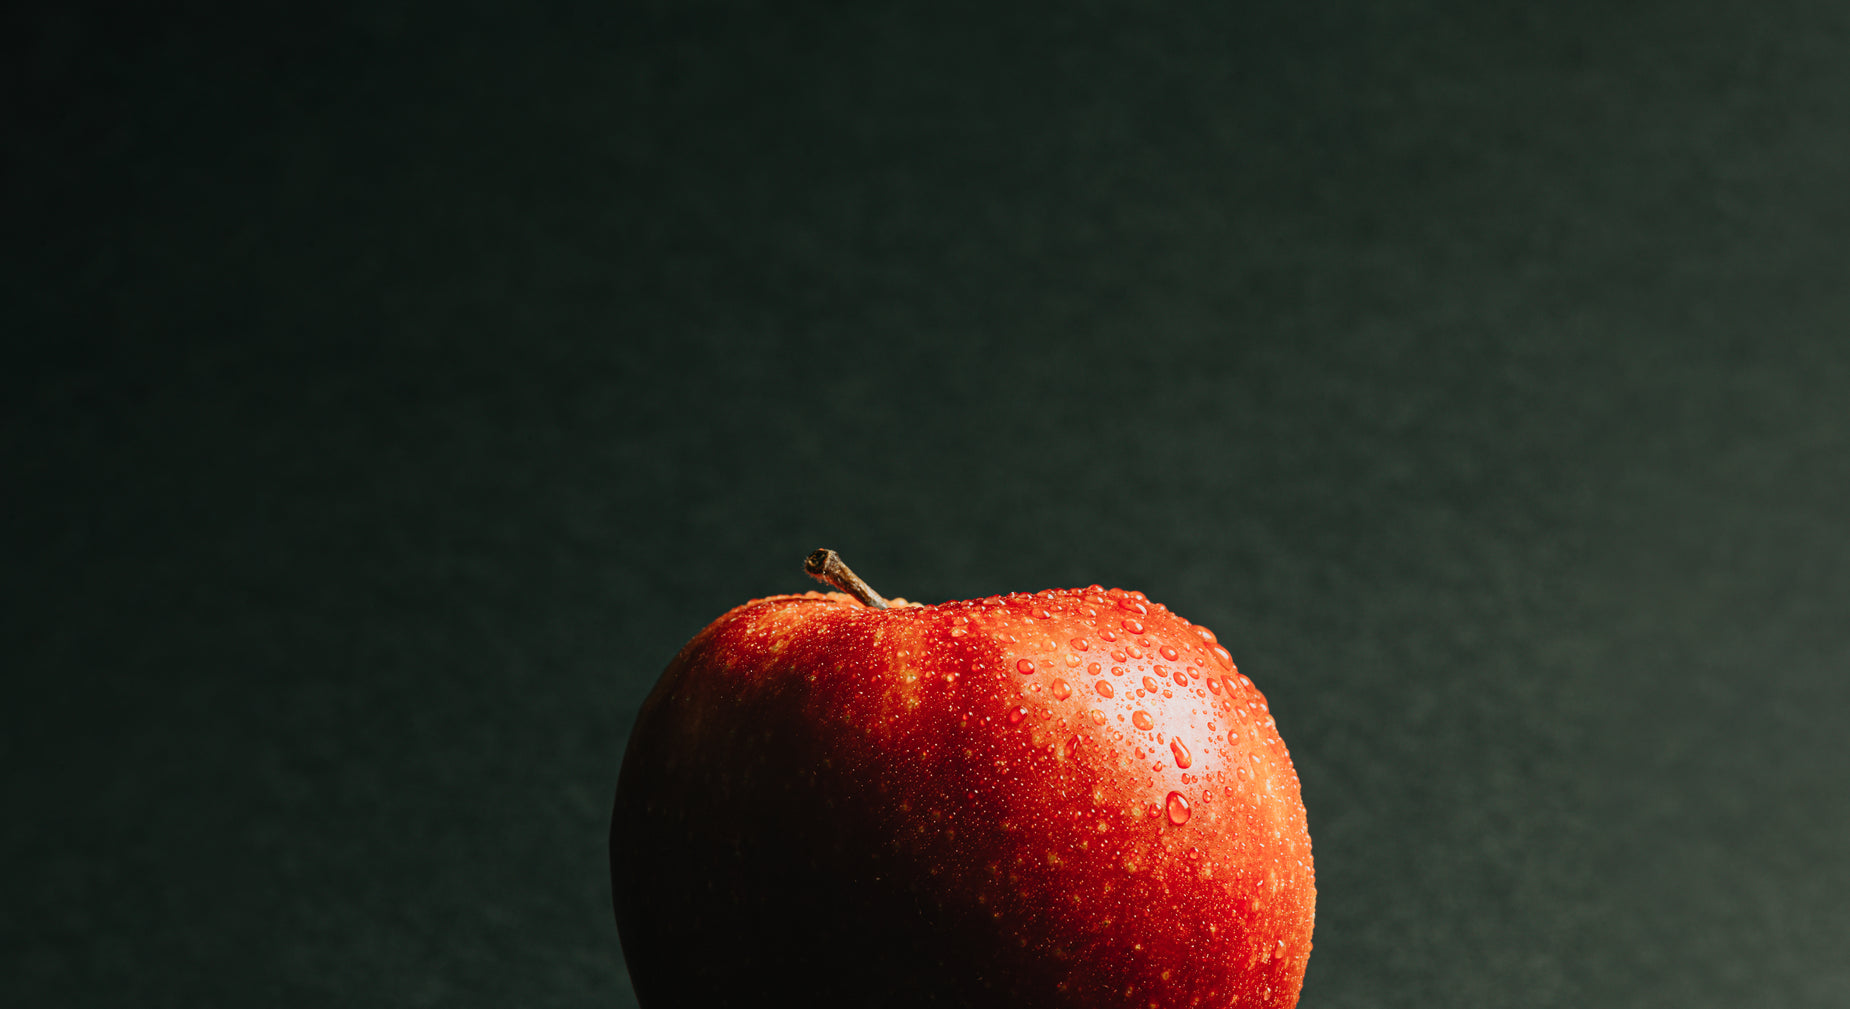 a close up s of a ripe apple